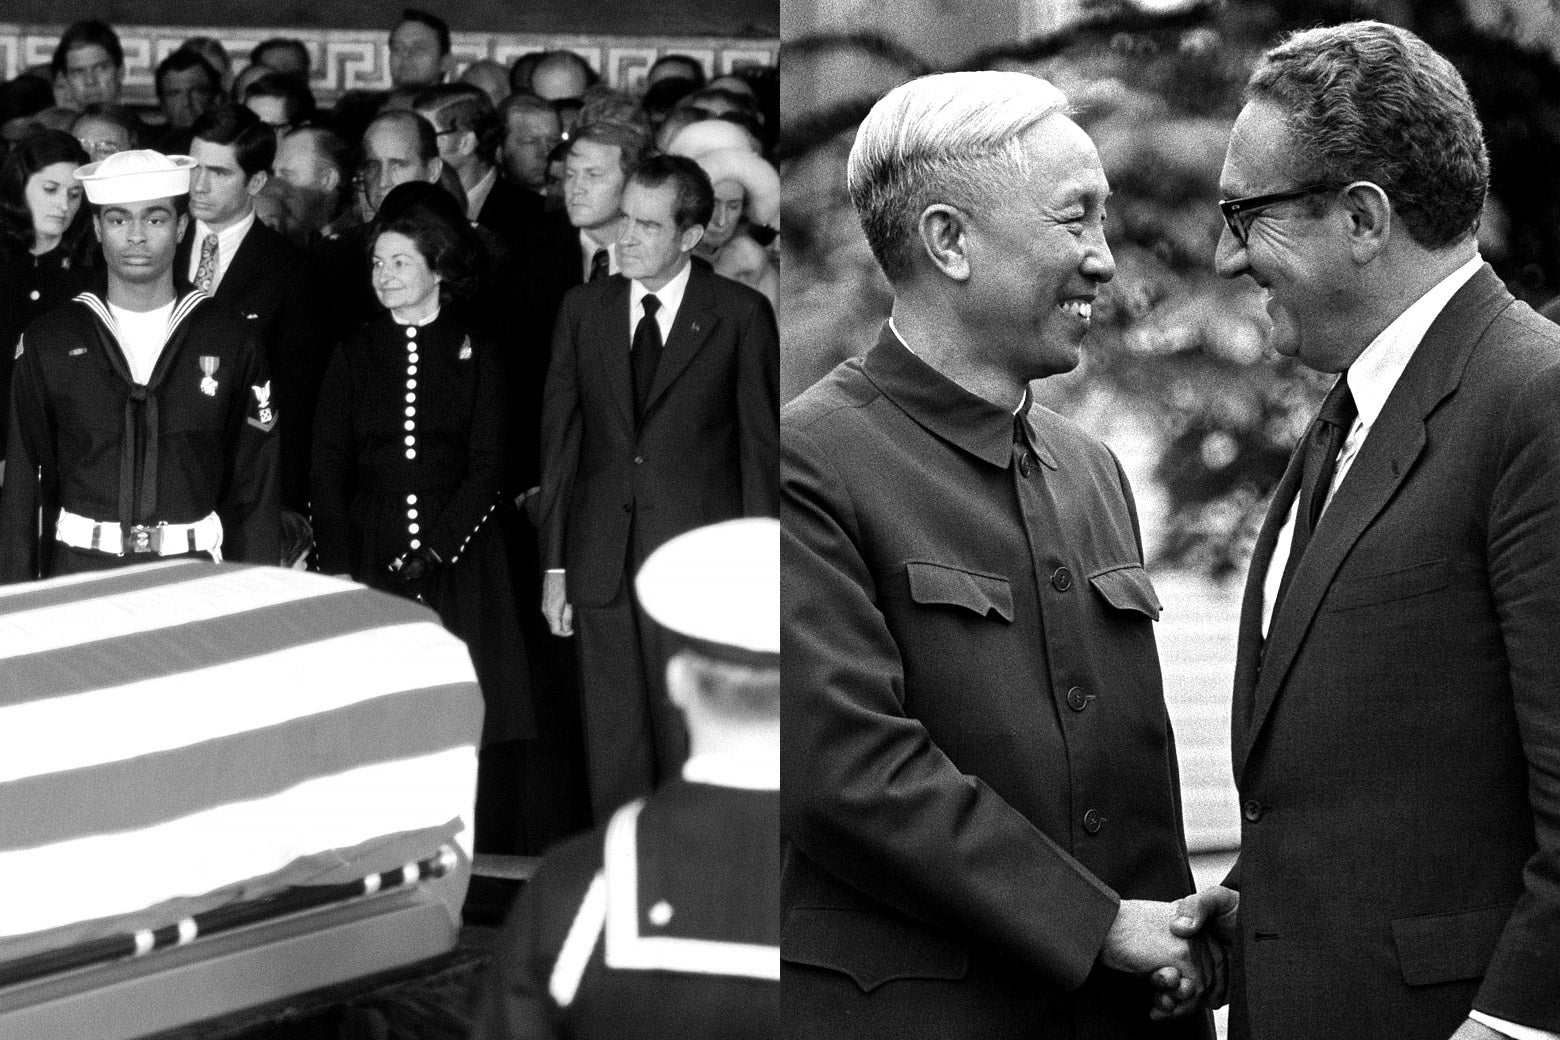 On the left a black-and-white photo of Lyndon B. Johnson's funeral and on the right, the resolution of the Vietnam War.